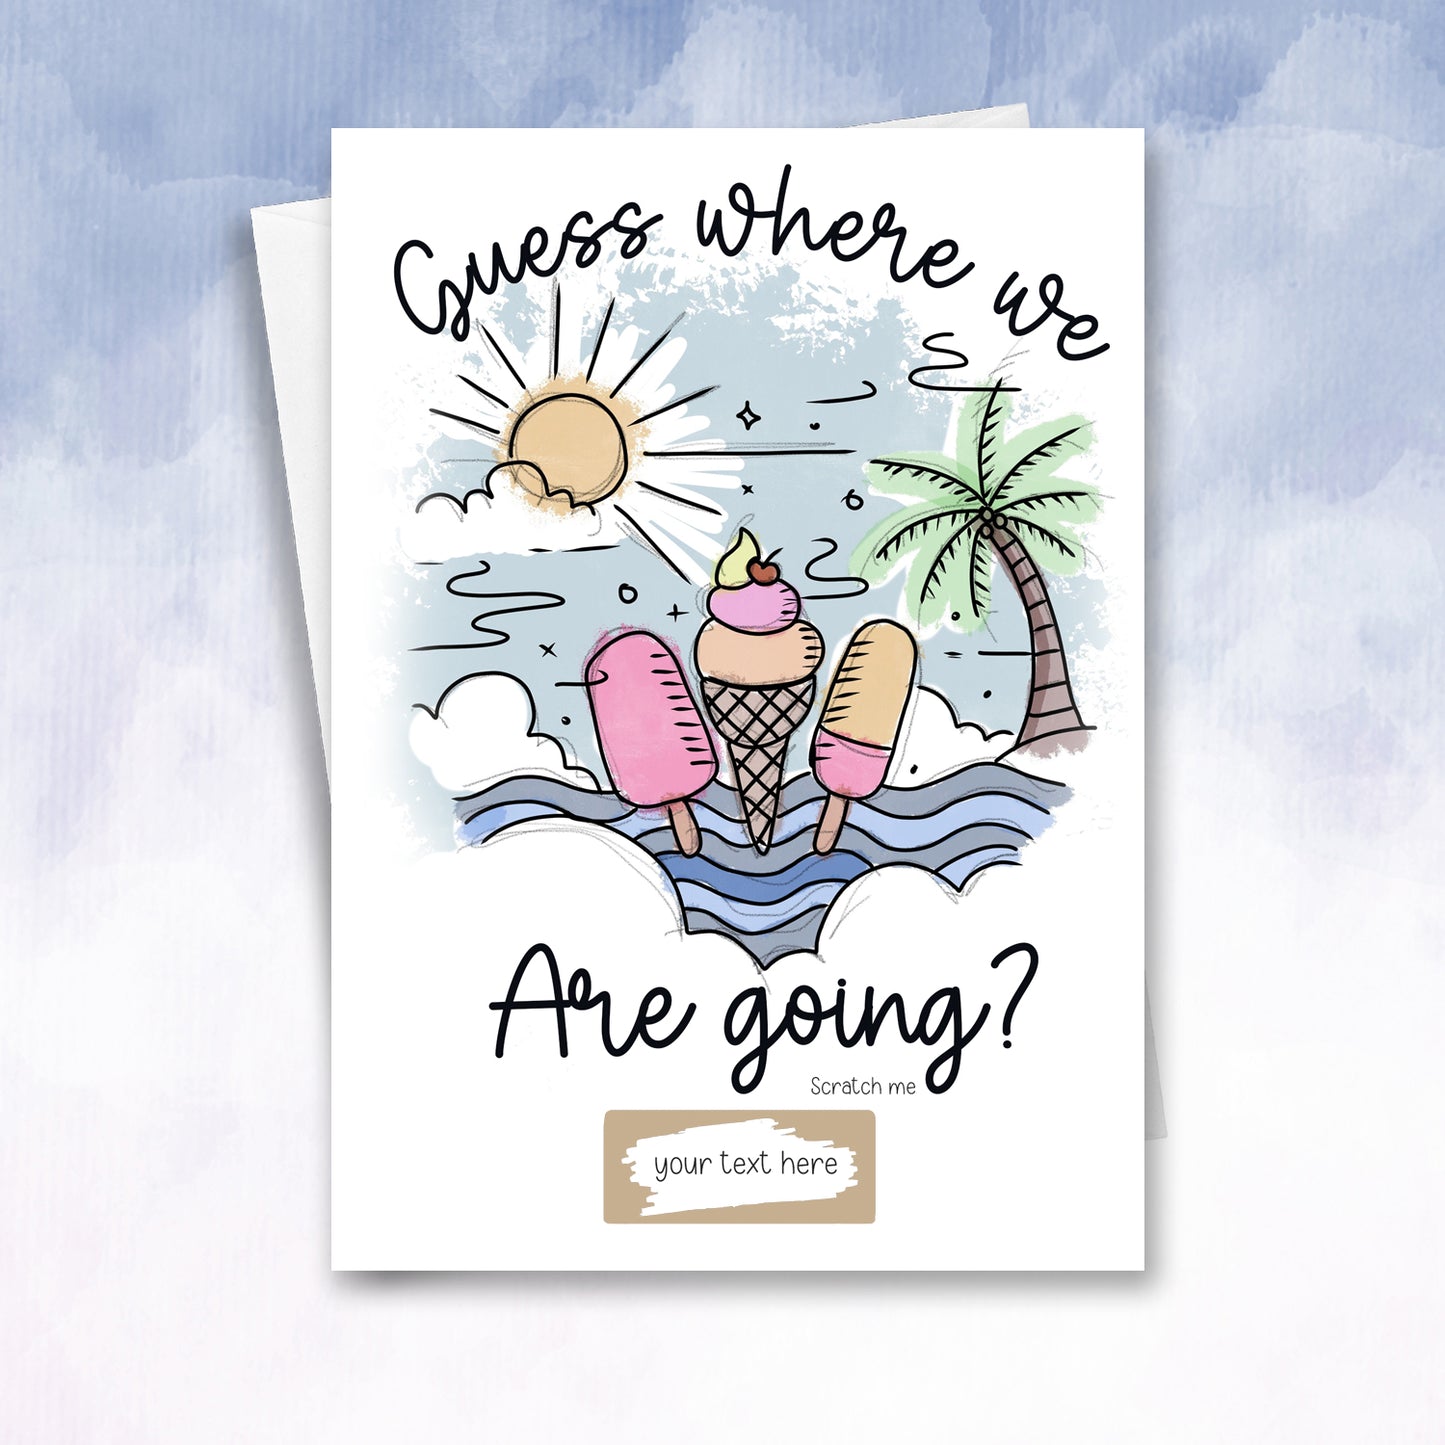 Guess Where we are going on holiday reveal Scratch card - 2f75e5-2